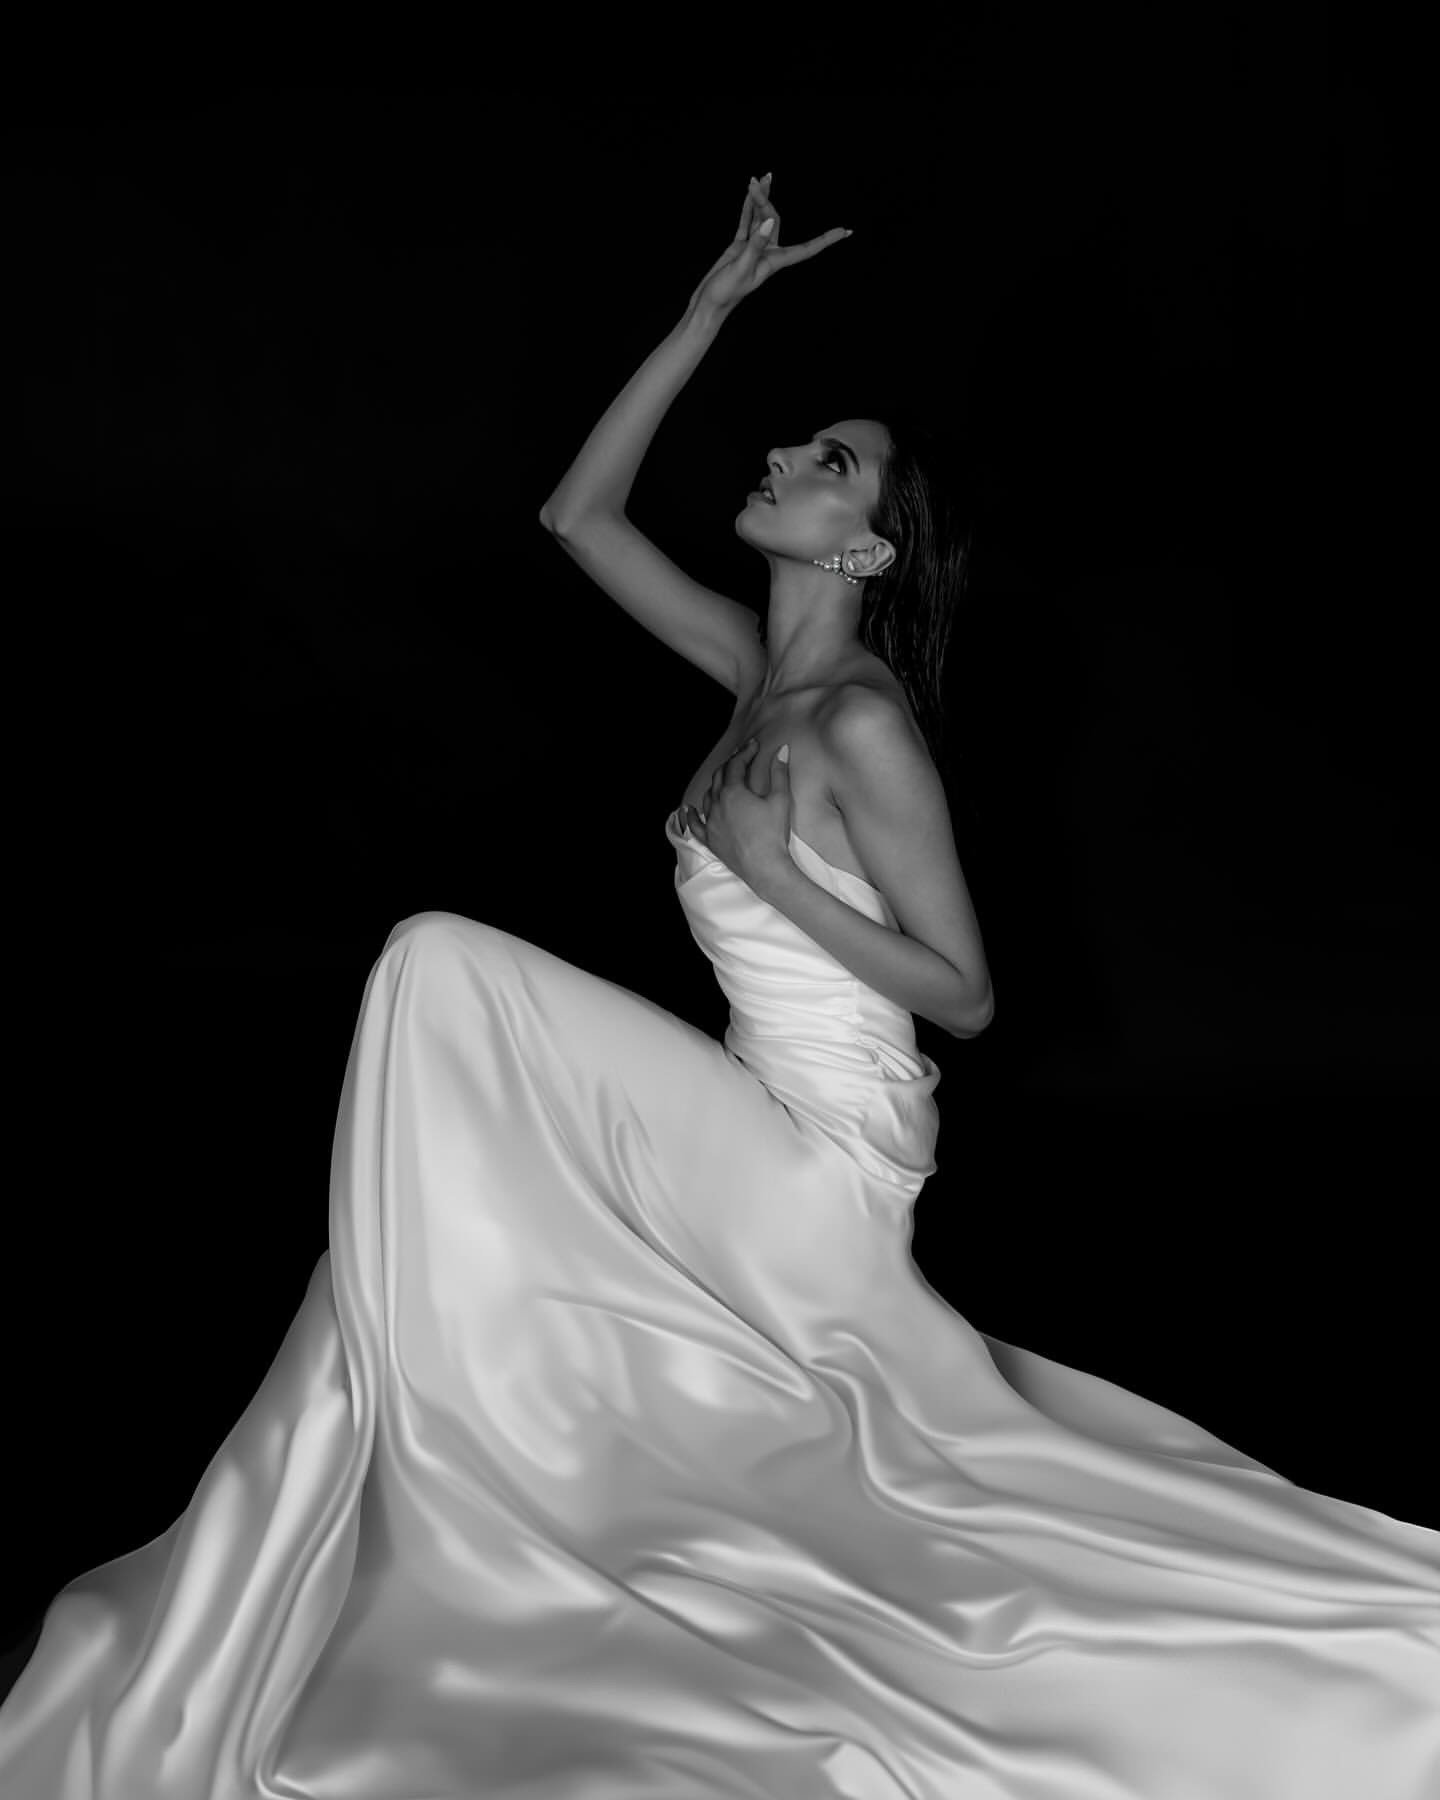 WELCOME to Sunday Eve Bridal // Alba + Stardust 

A beautiful new offering for modern brides, Alba + Stardust gowns are thoughtfully created and effortlessly cool. Expect masterful draping, luxurious fabrics and minimalist designs. Visit us in our Pa